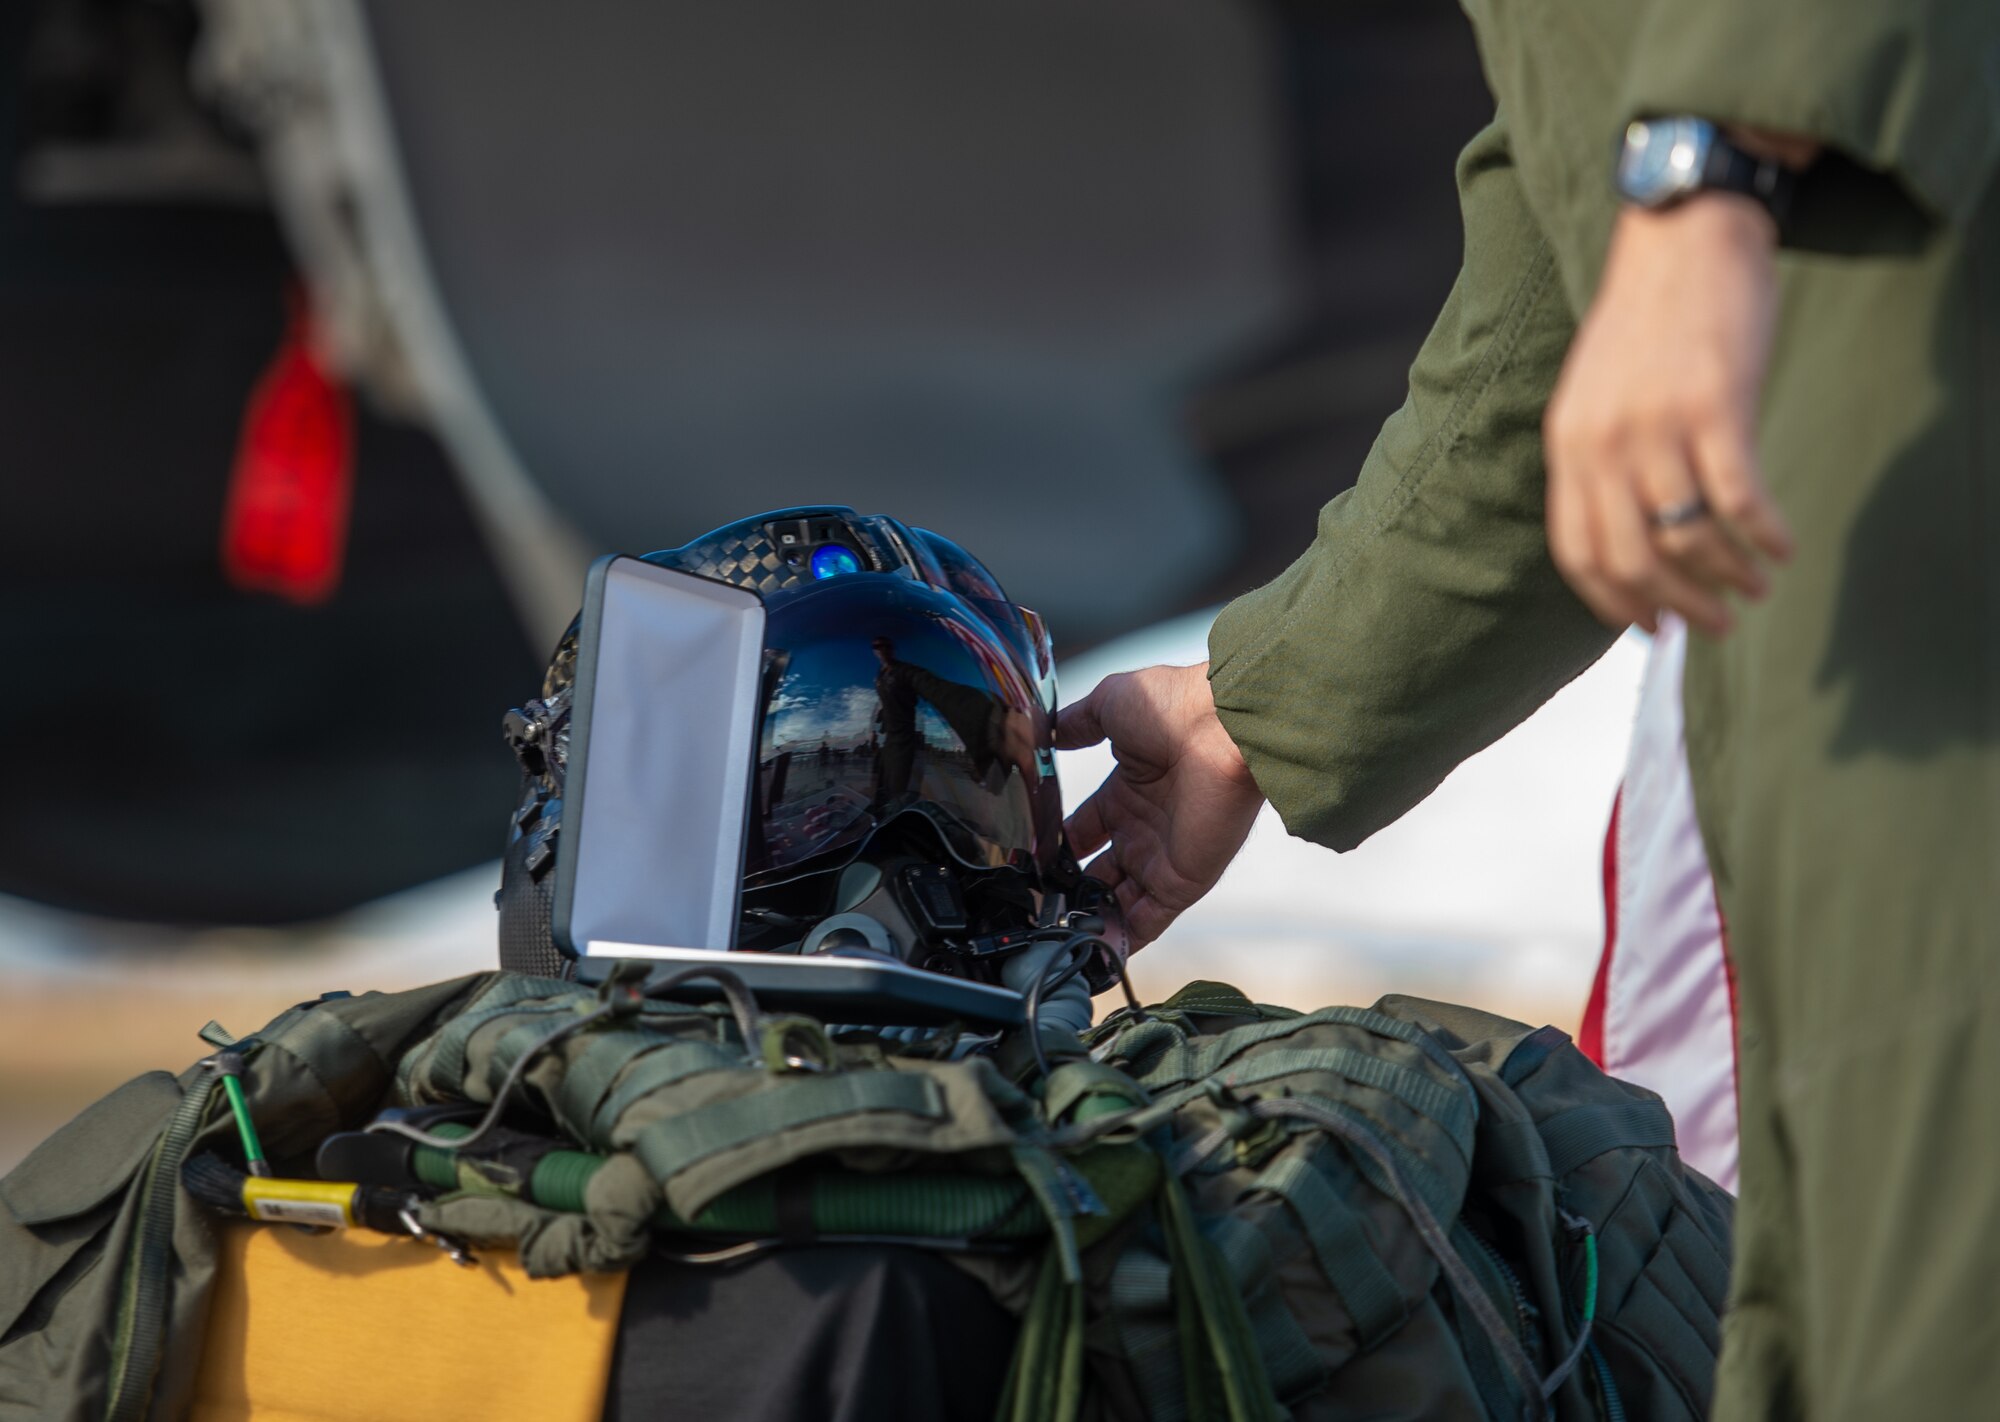 A fighter pilot touches Capt. Stephen “Trip” Grace’s F-35 helmet during his memorial service Dec. 7, 2018, at Luke Air Force Base, Ariz. Numerous family members and friends were in attendance to honor and celebrate the life of Capt. Grace. (U.S. Air Force photo by Senior Airman Alexander Cook)